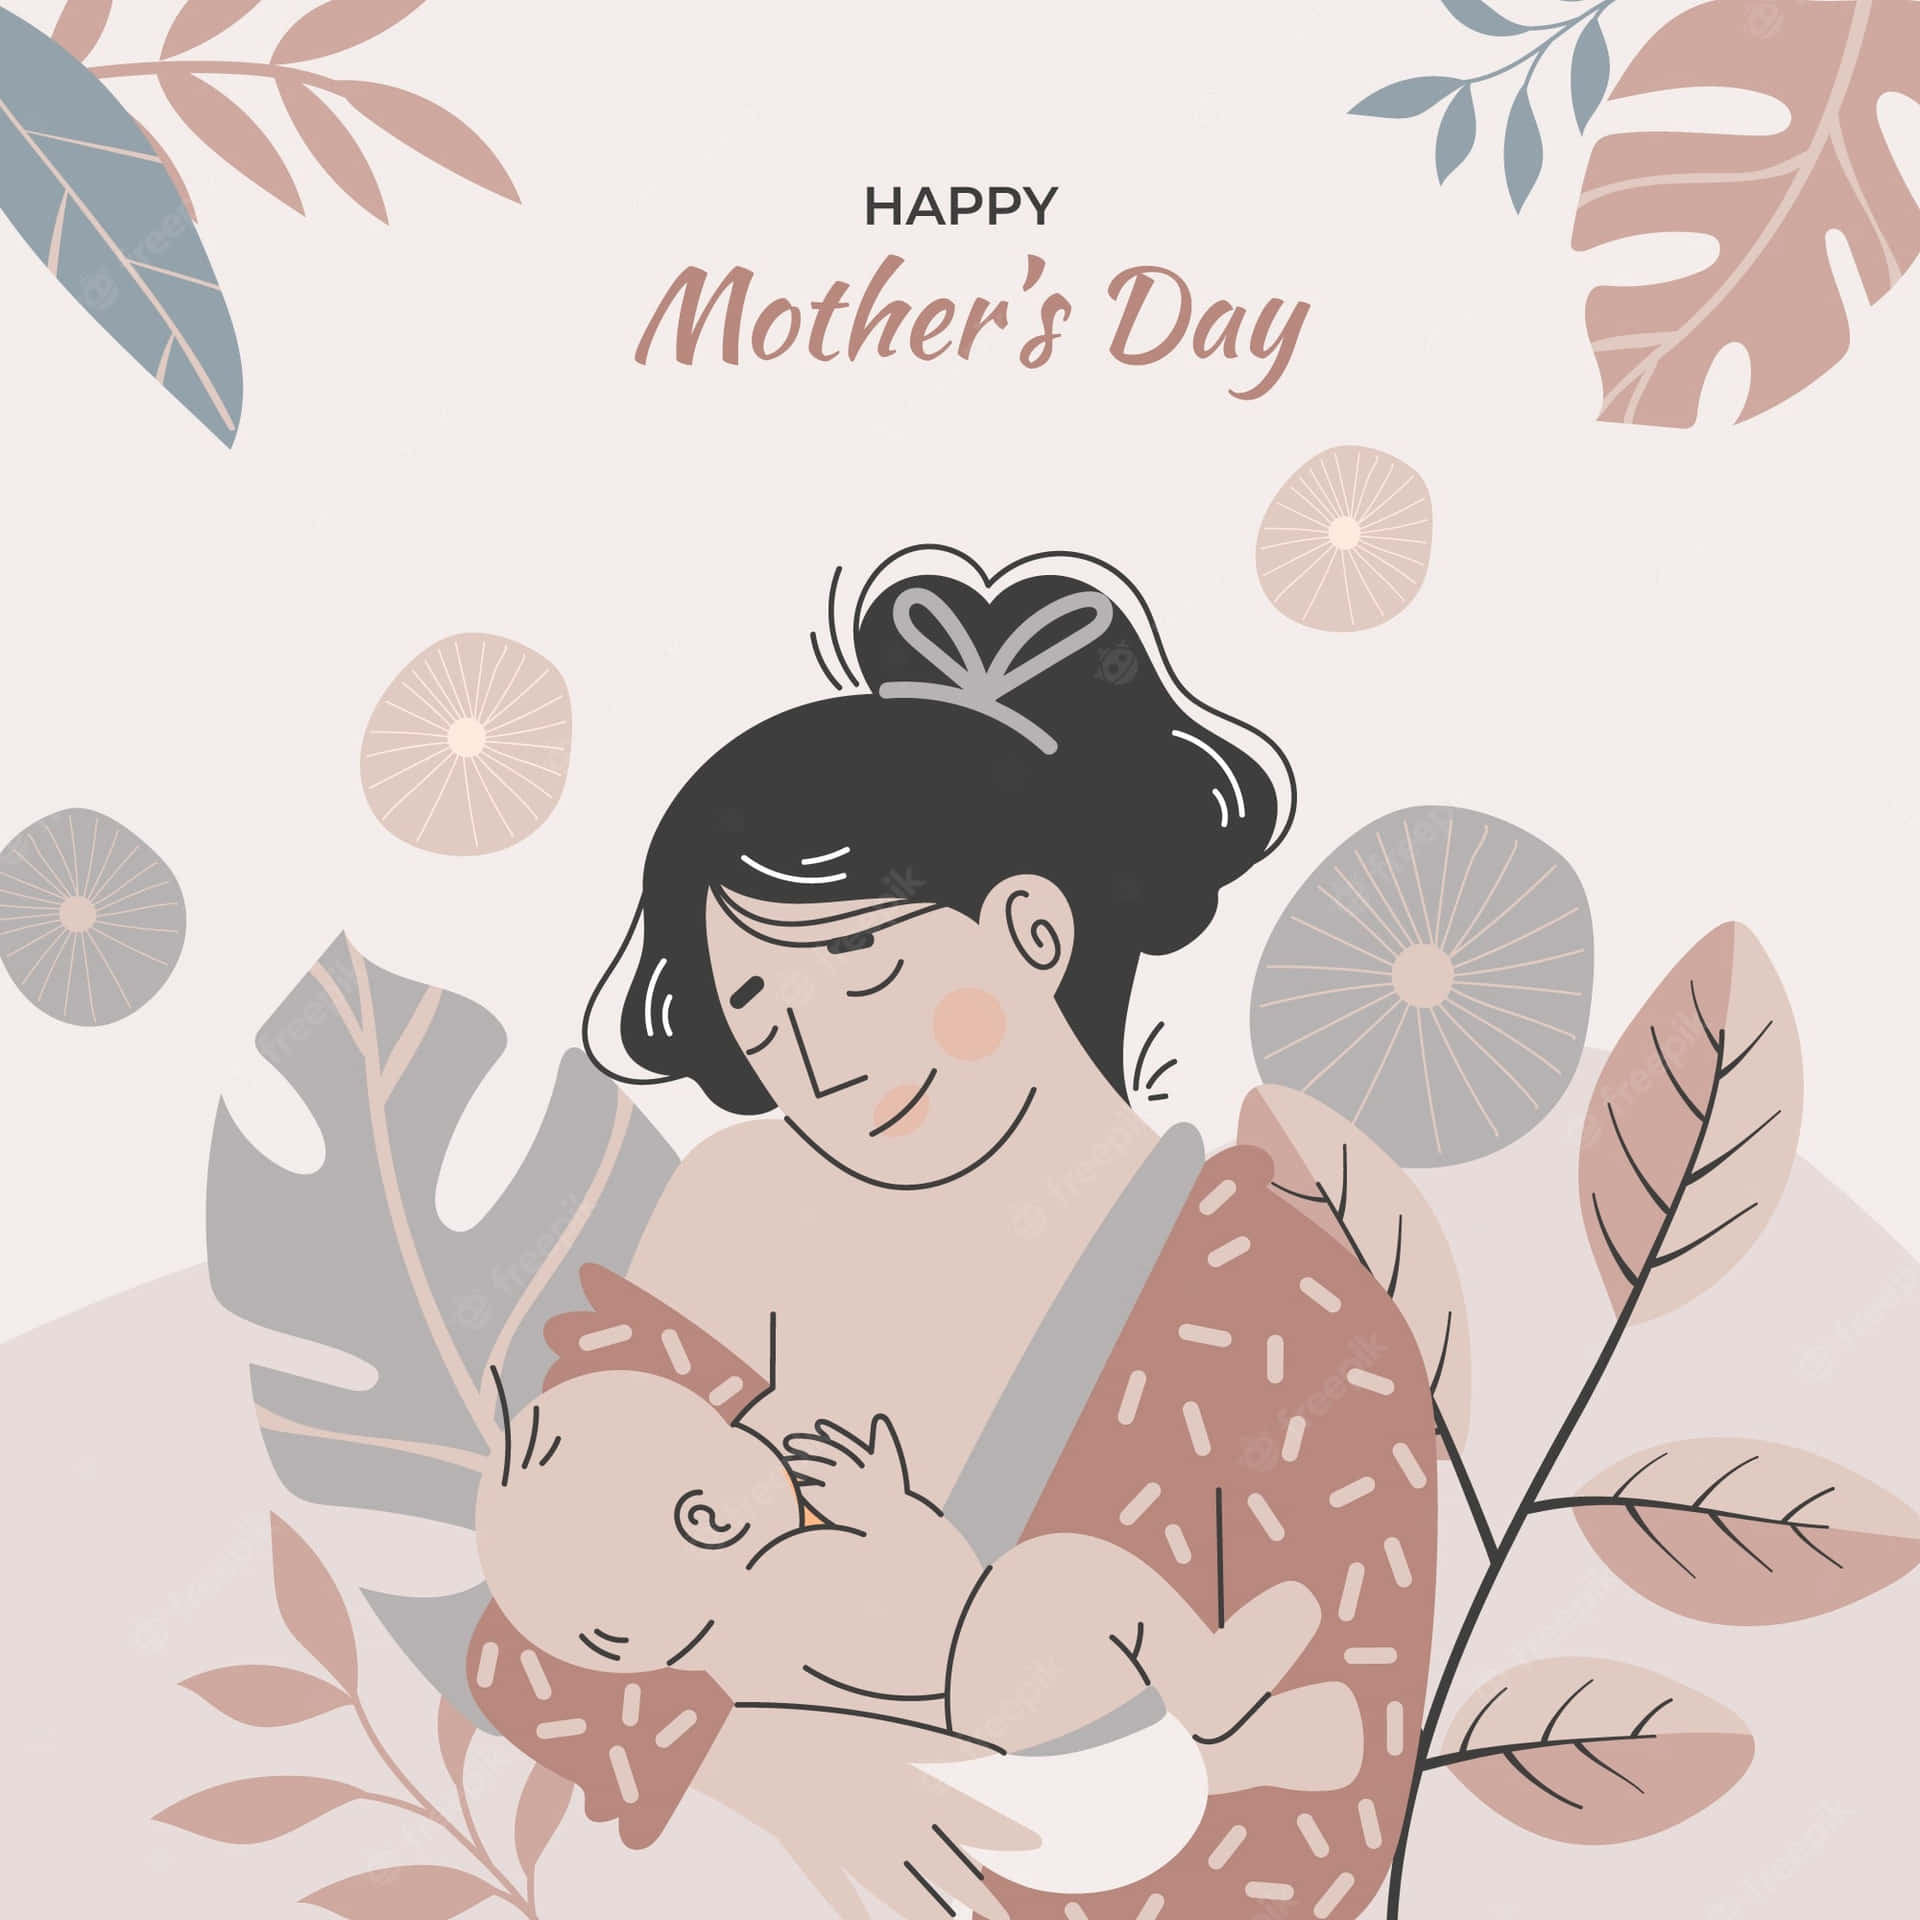 Happy Mother's Day Card With A Mother And Baby